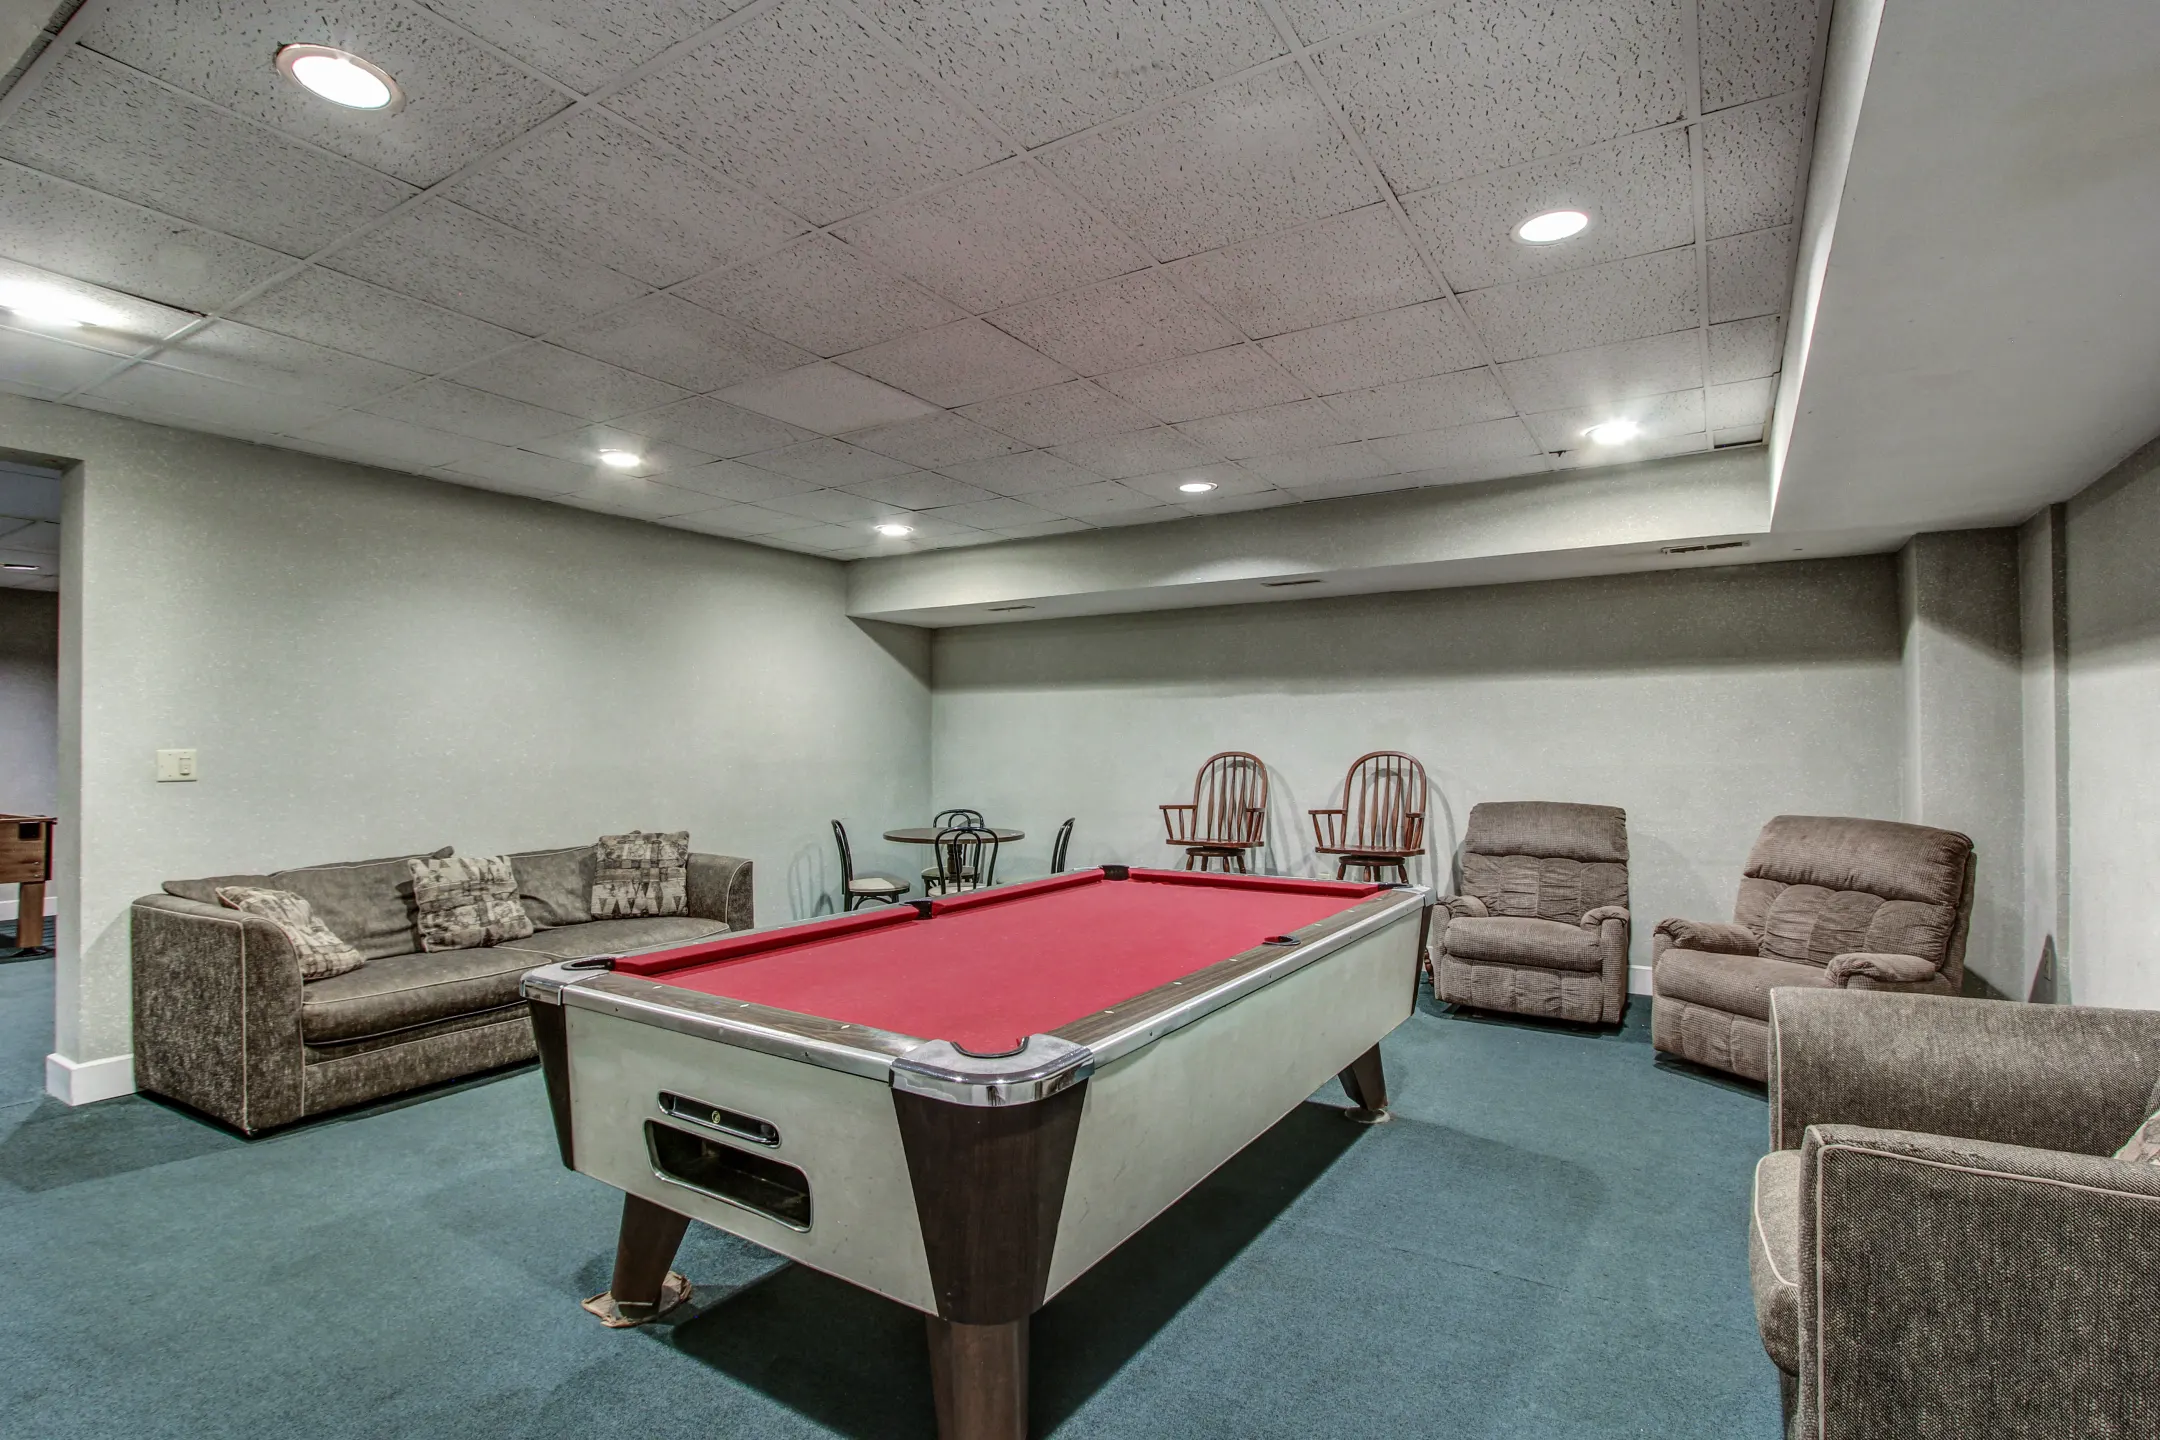 Gaming Center - Portage Towers - Cuyahoga Falls, OH